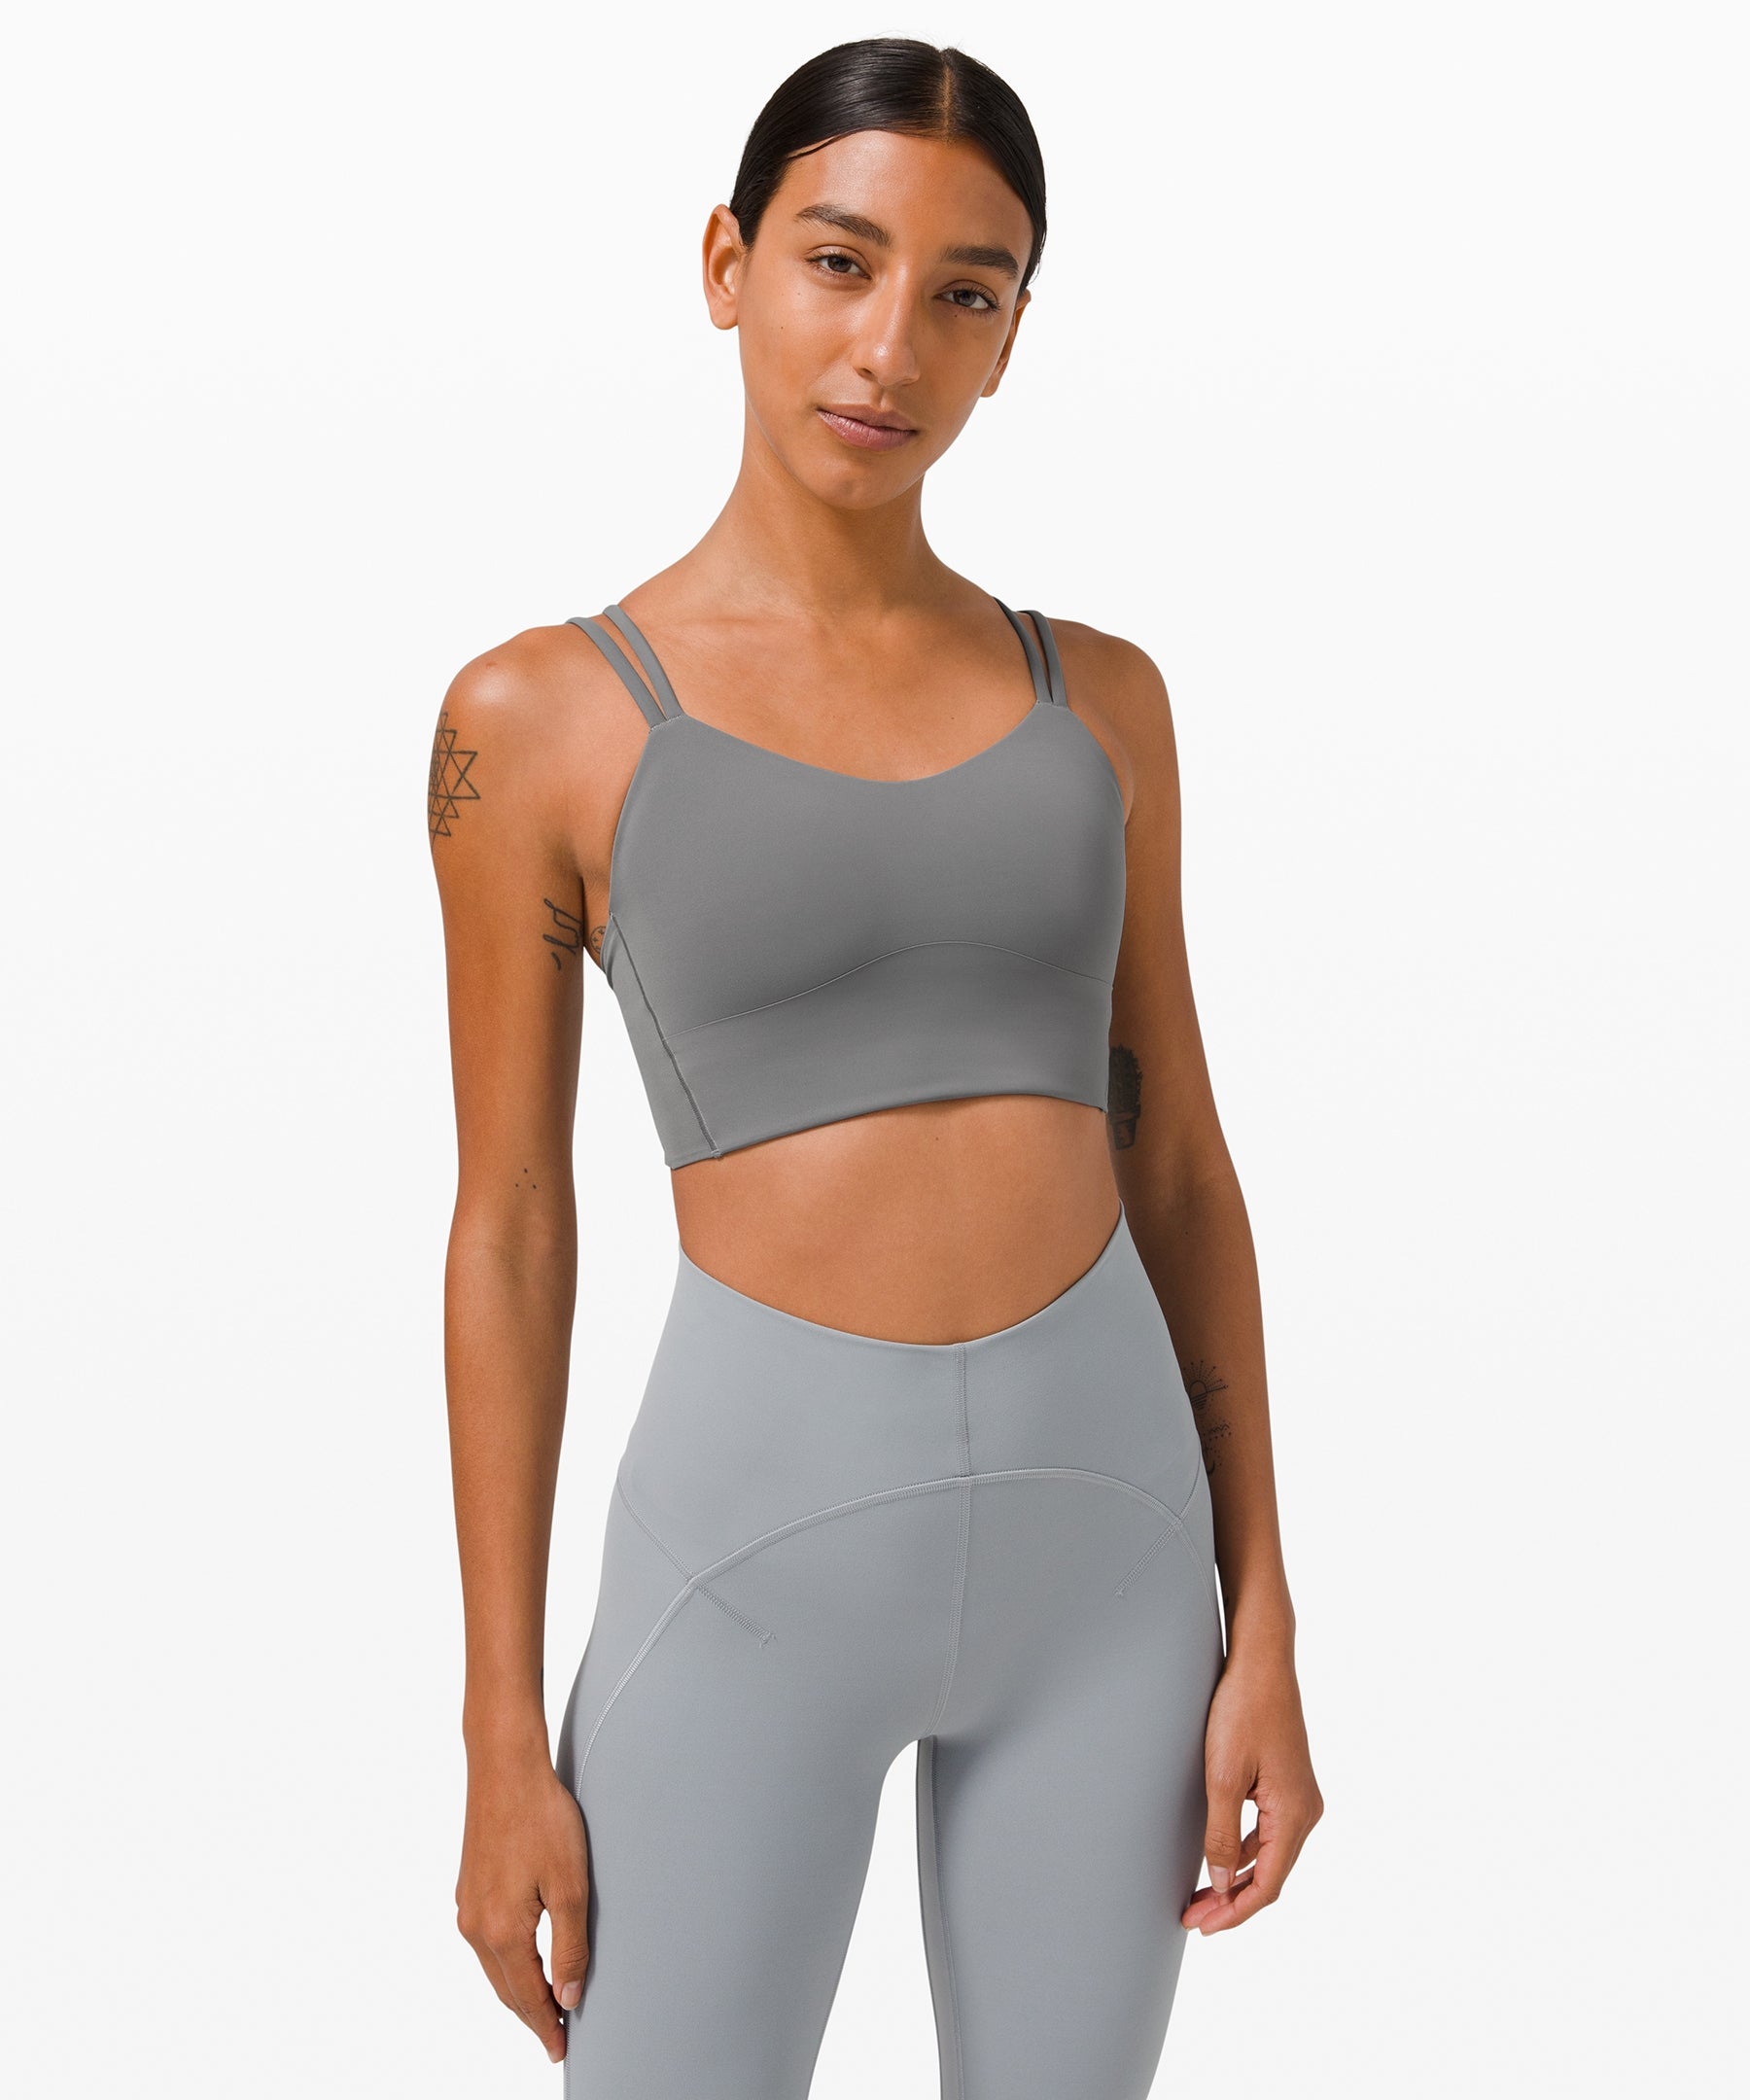 25 Things From lululemon That Are Stylish As Heck